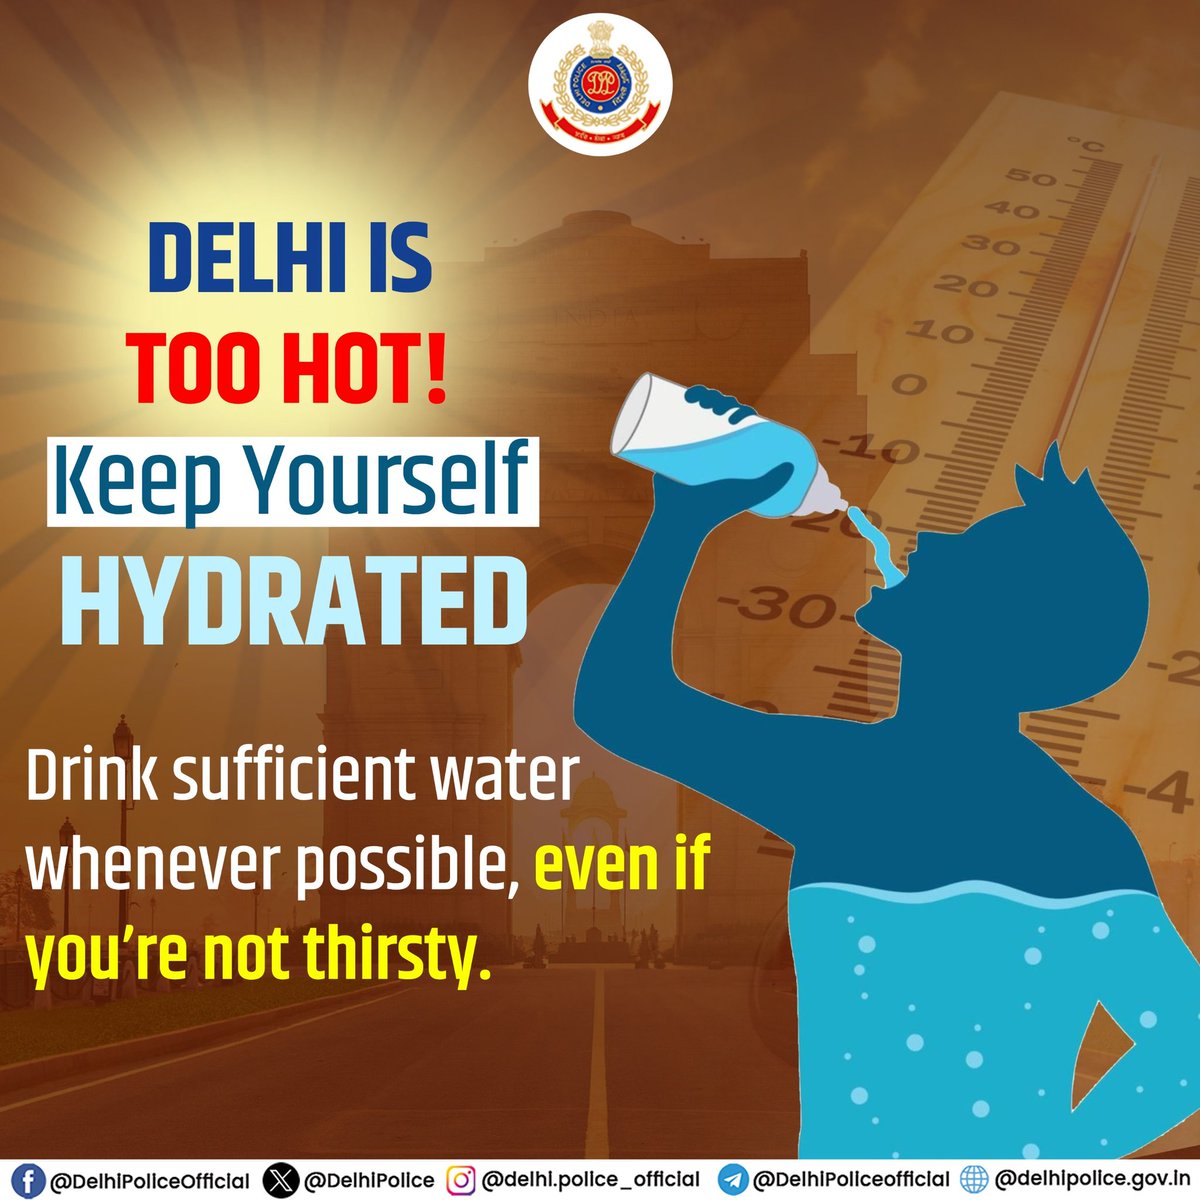 Stay Alert, stay safe and keep yourself #Hydrated #DPCares